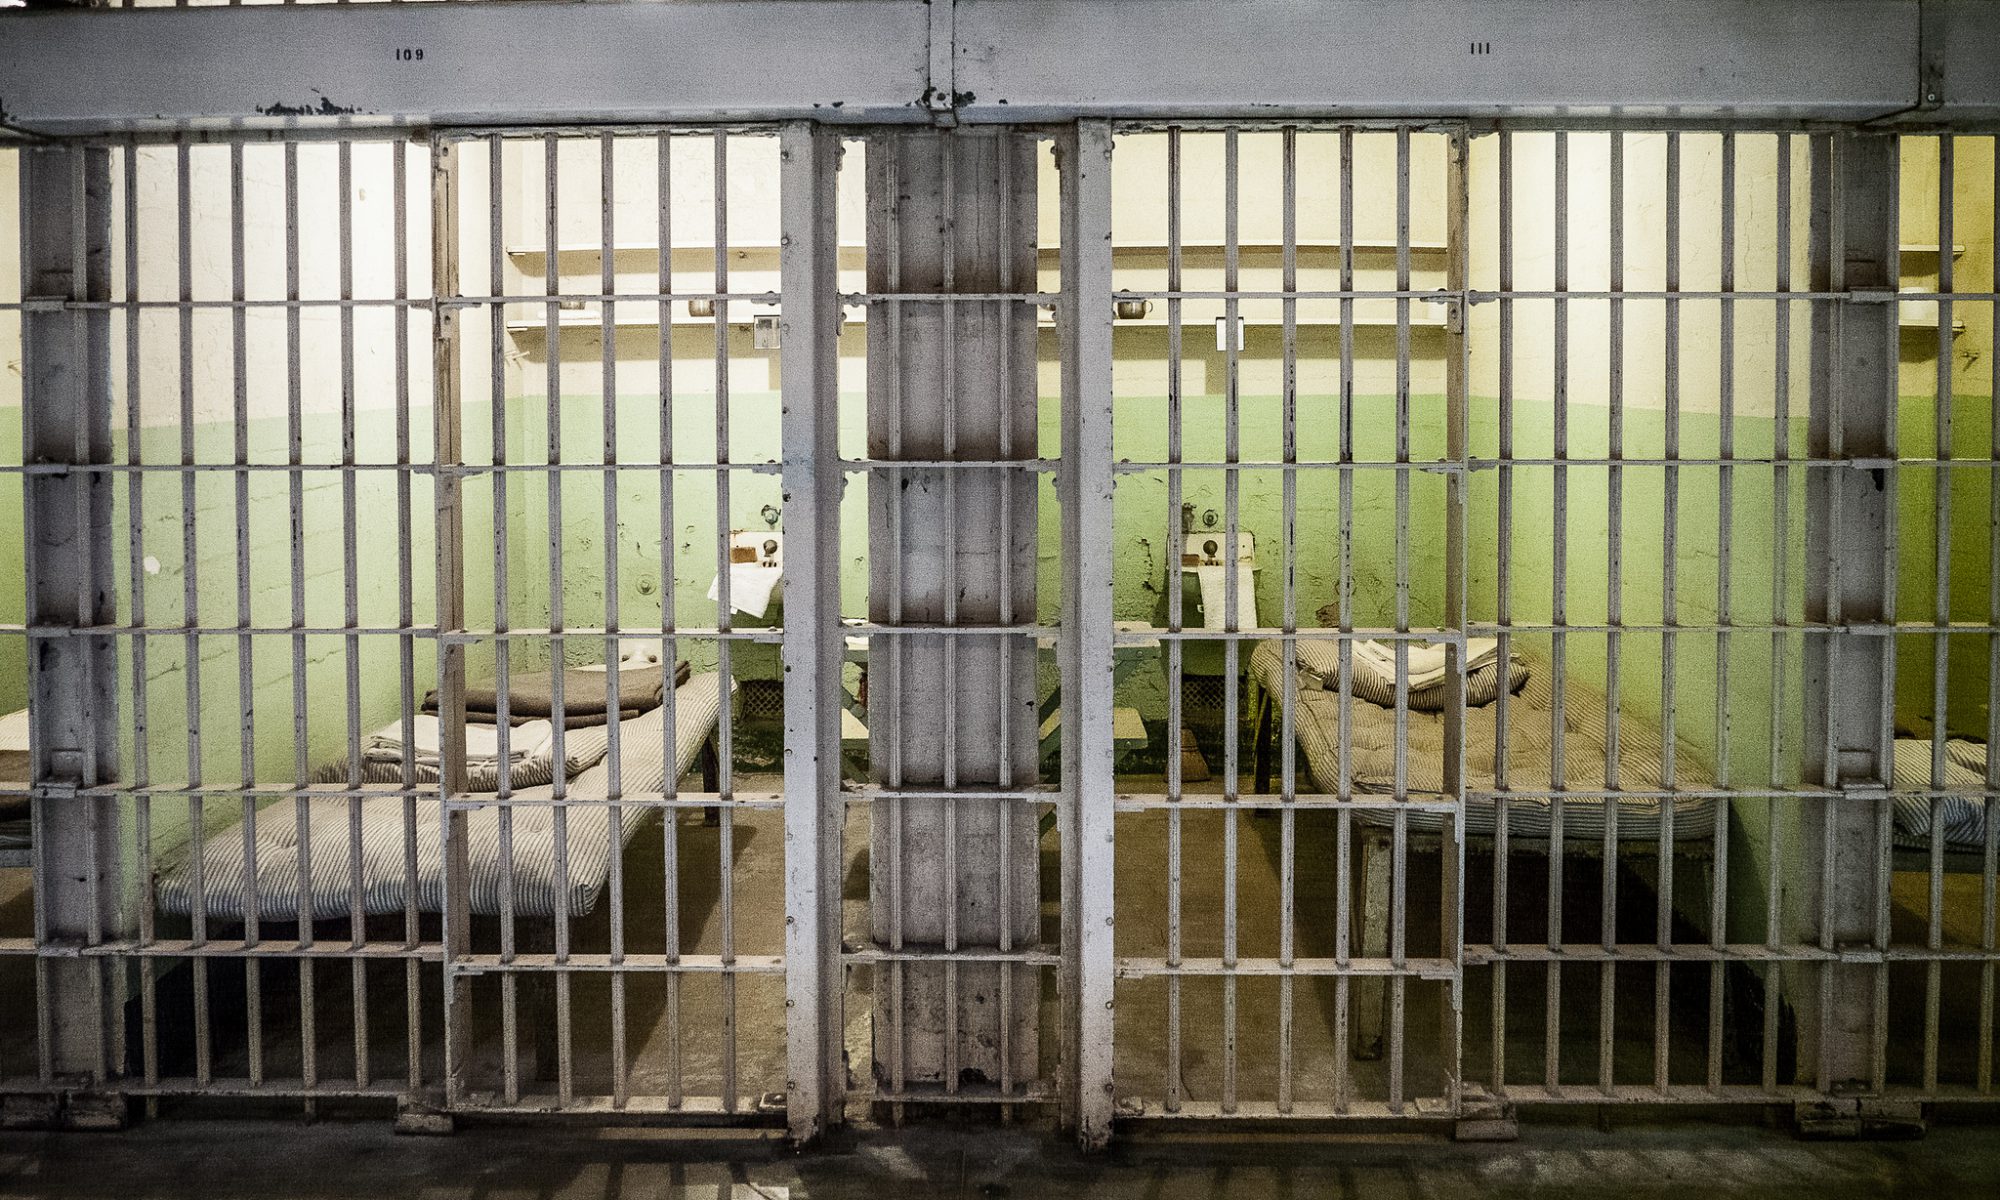 image of two adjoining prison cells